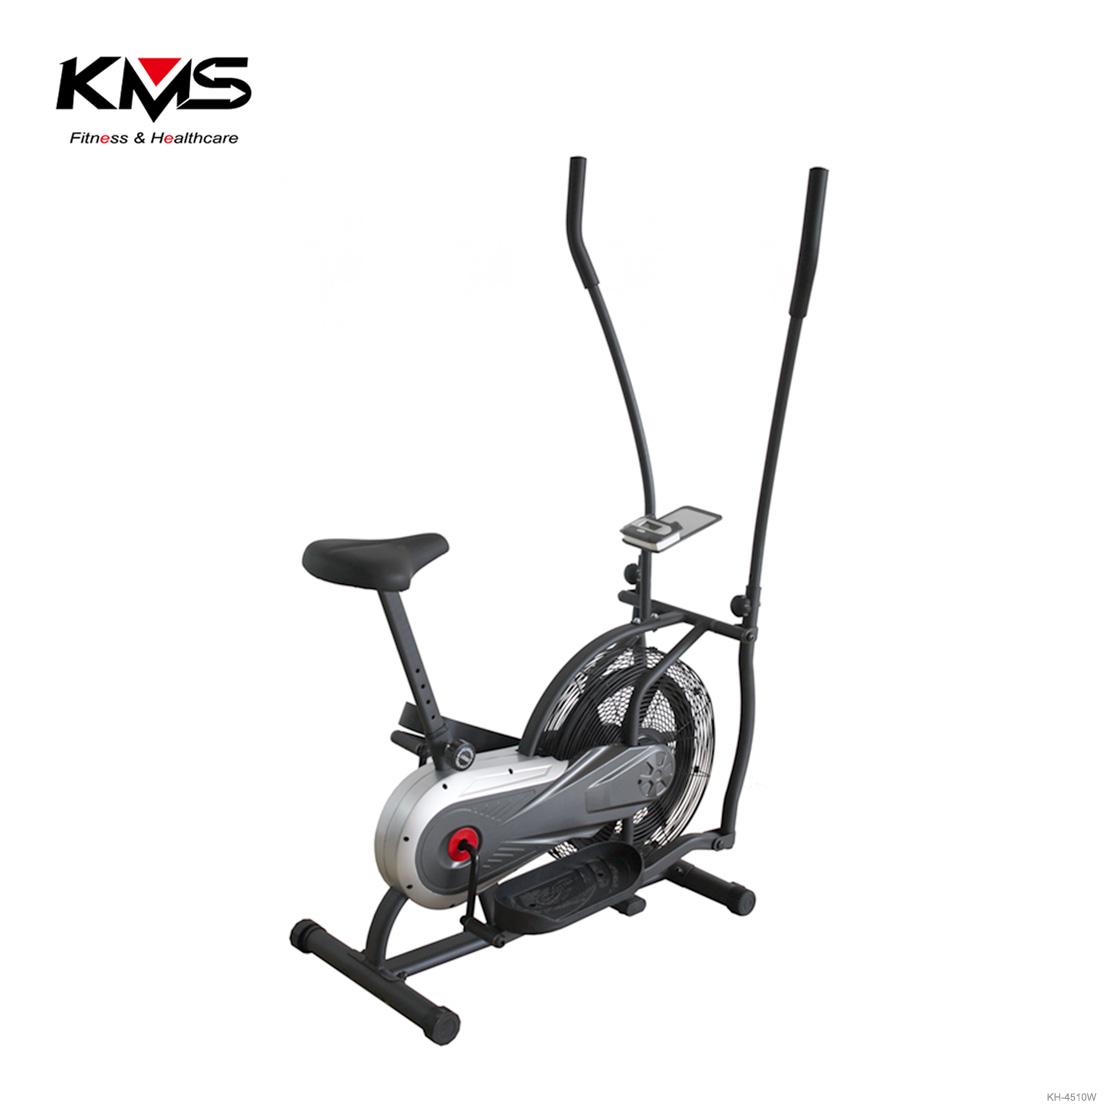 Fan Exercise Bike with Air Resistance System